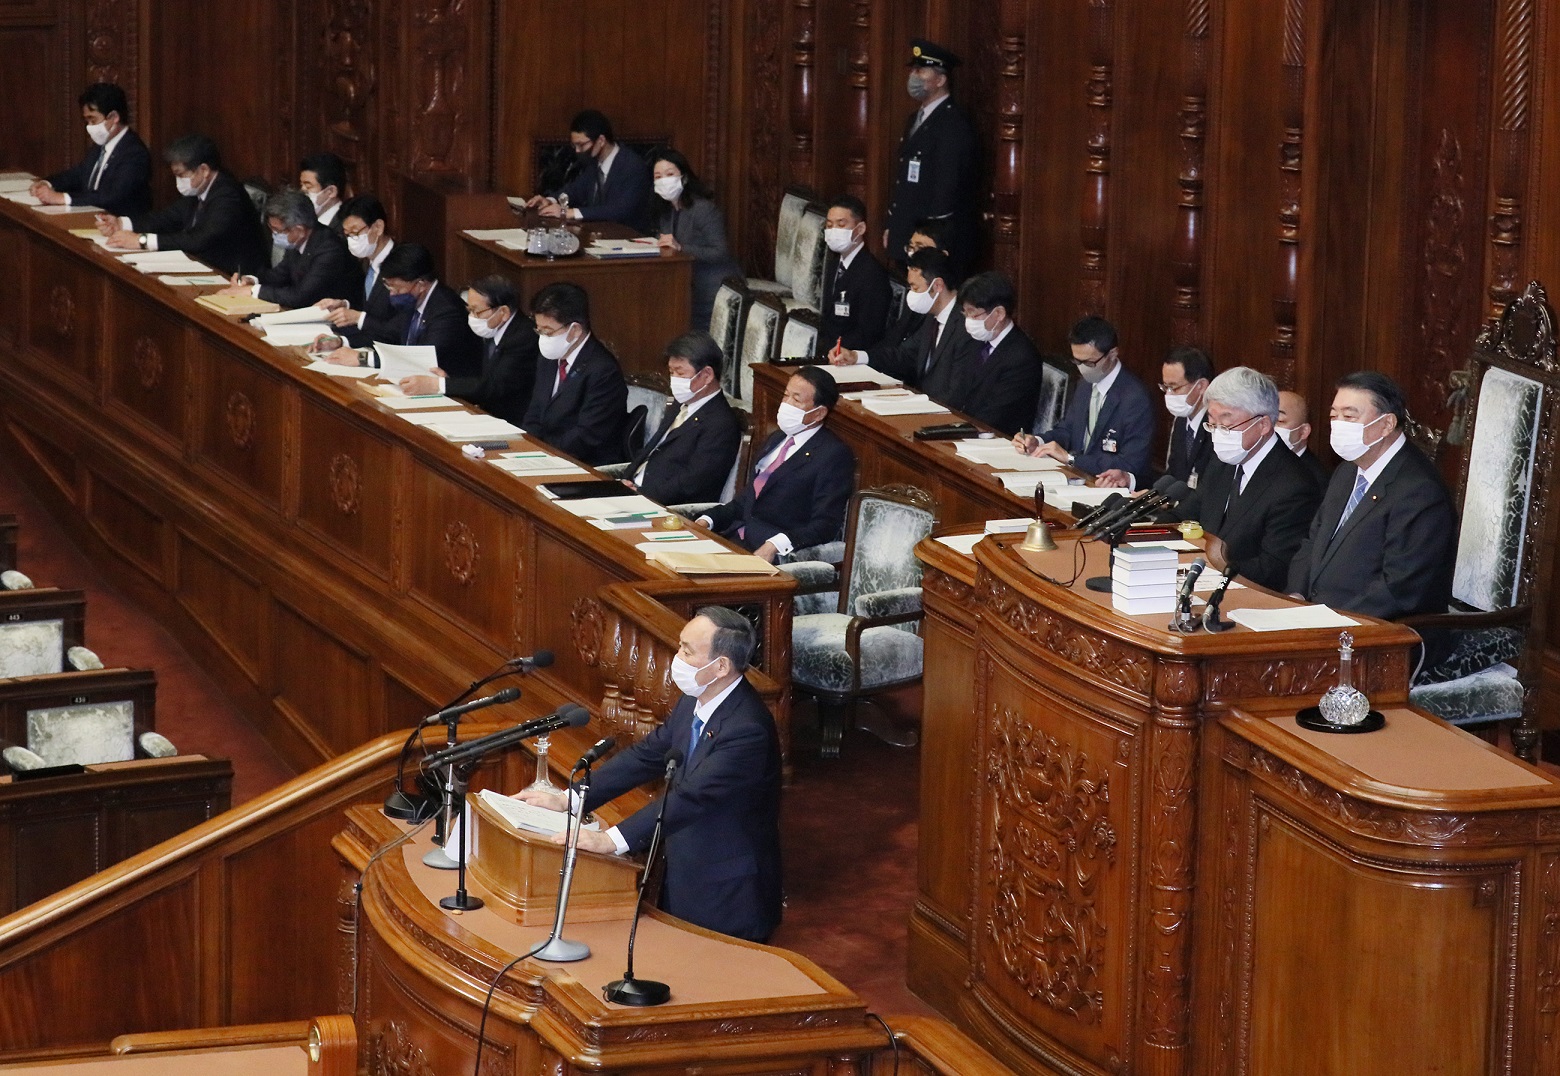 Photograph of the Prime Minister delivering a policy speech during the plenary session of the House of Representatives (7)